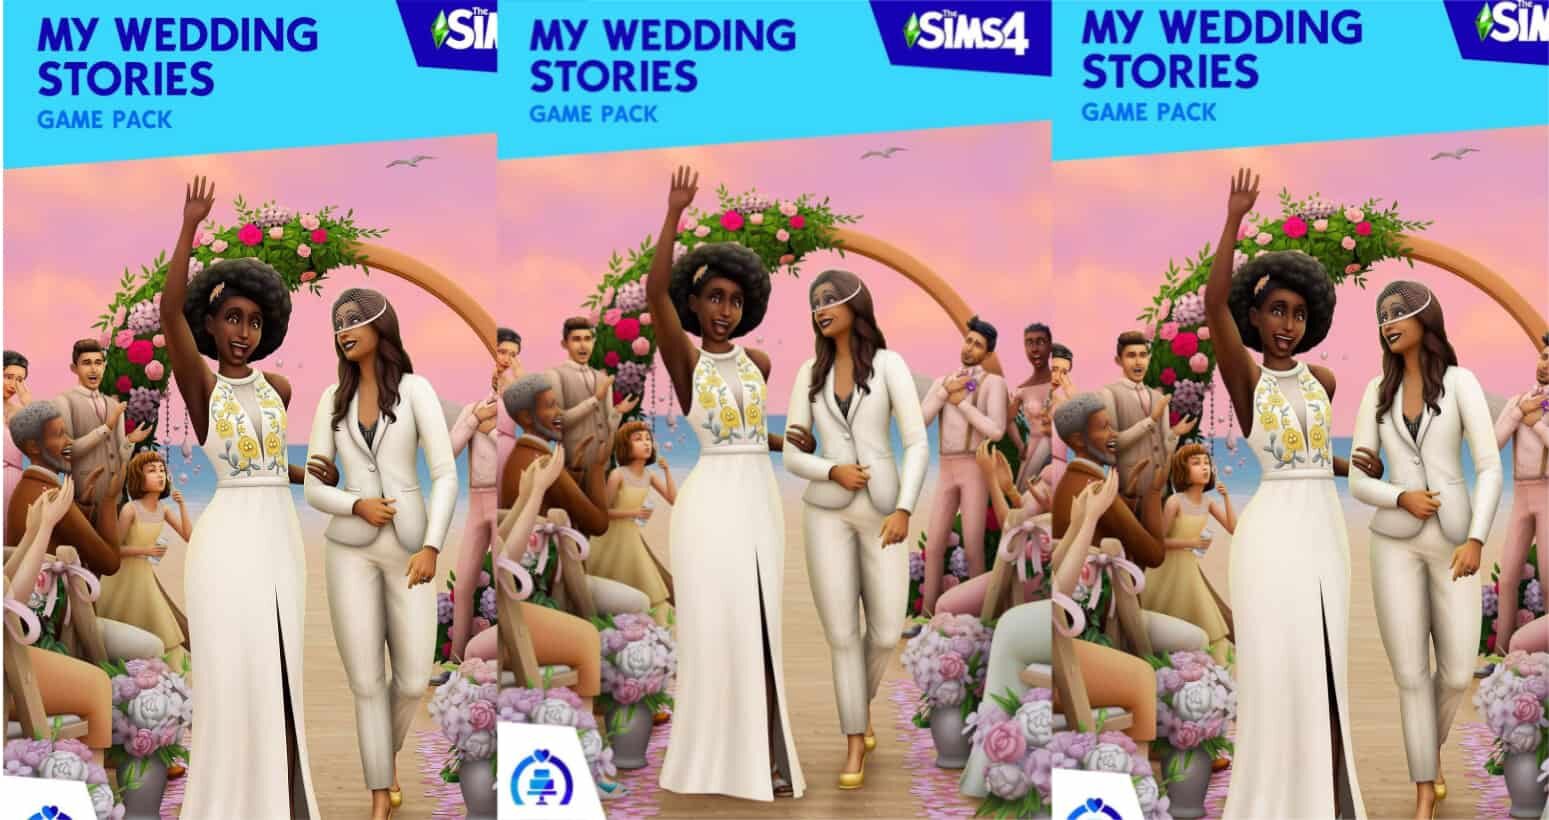 sims 4 wedding stories cover 1